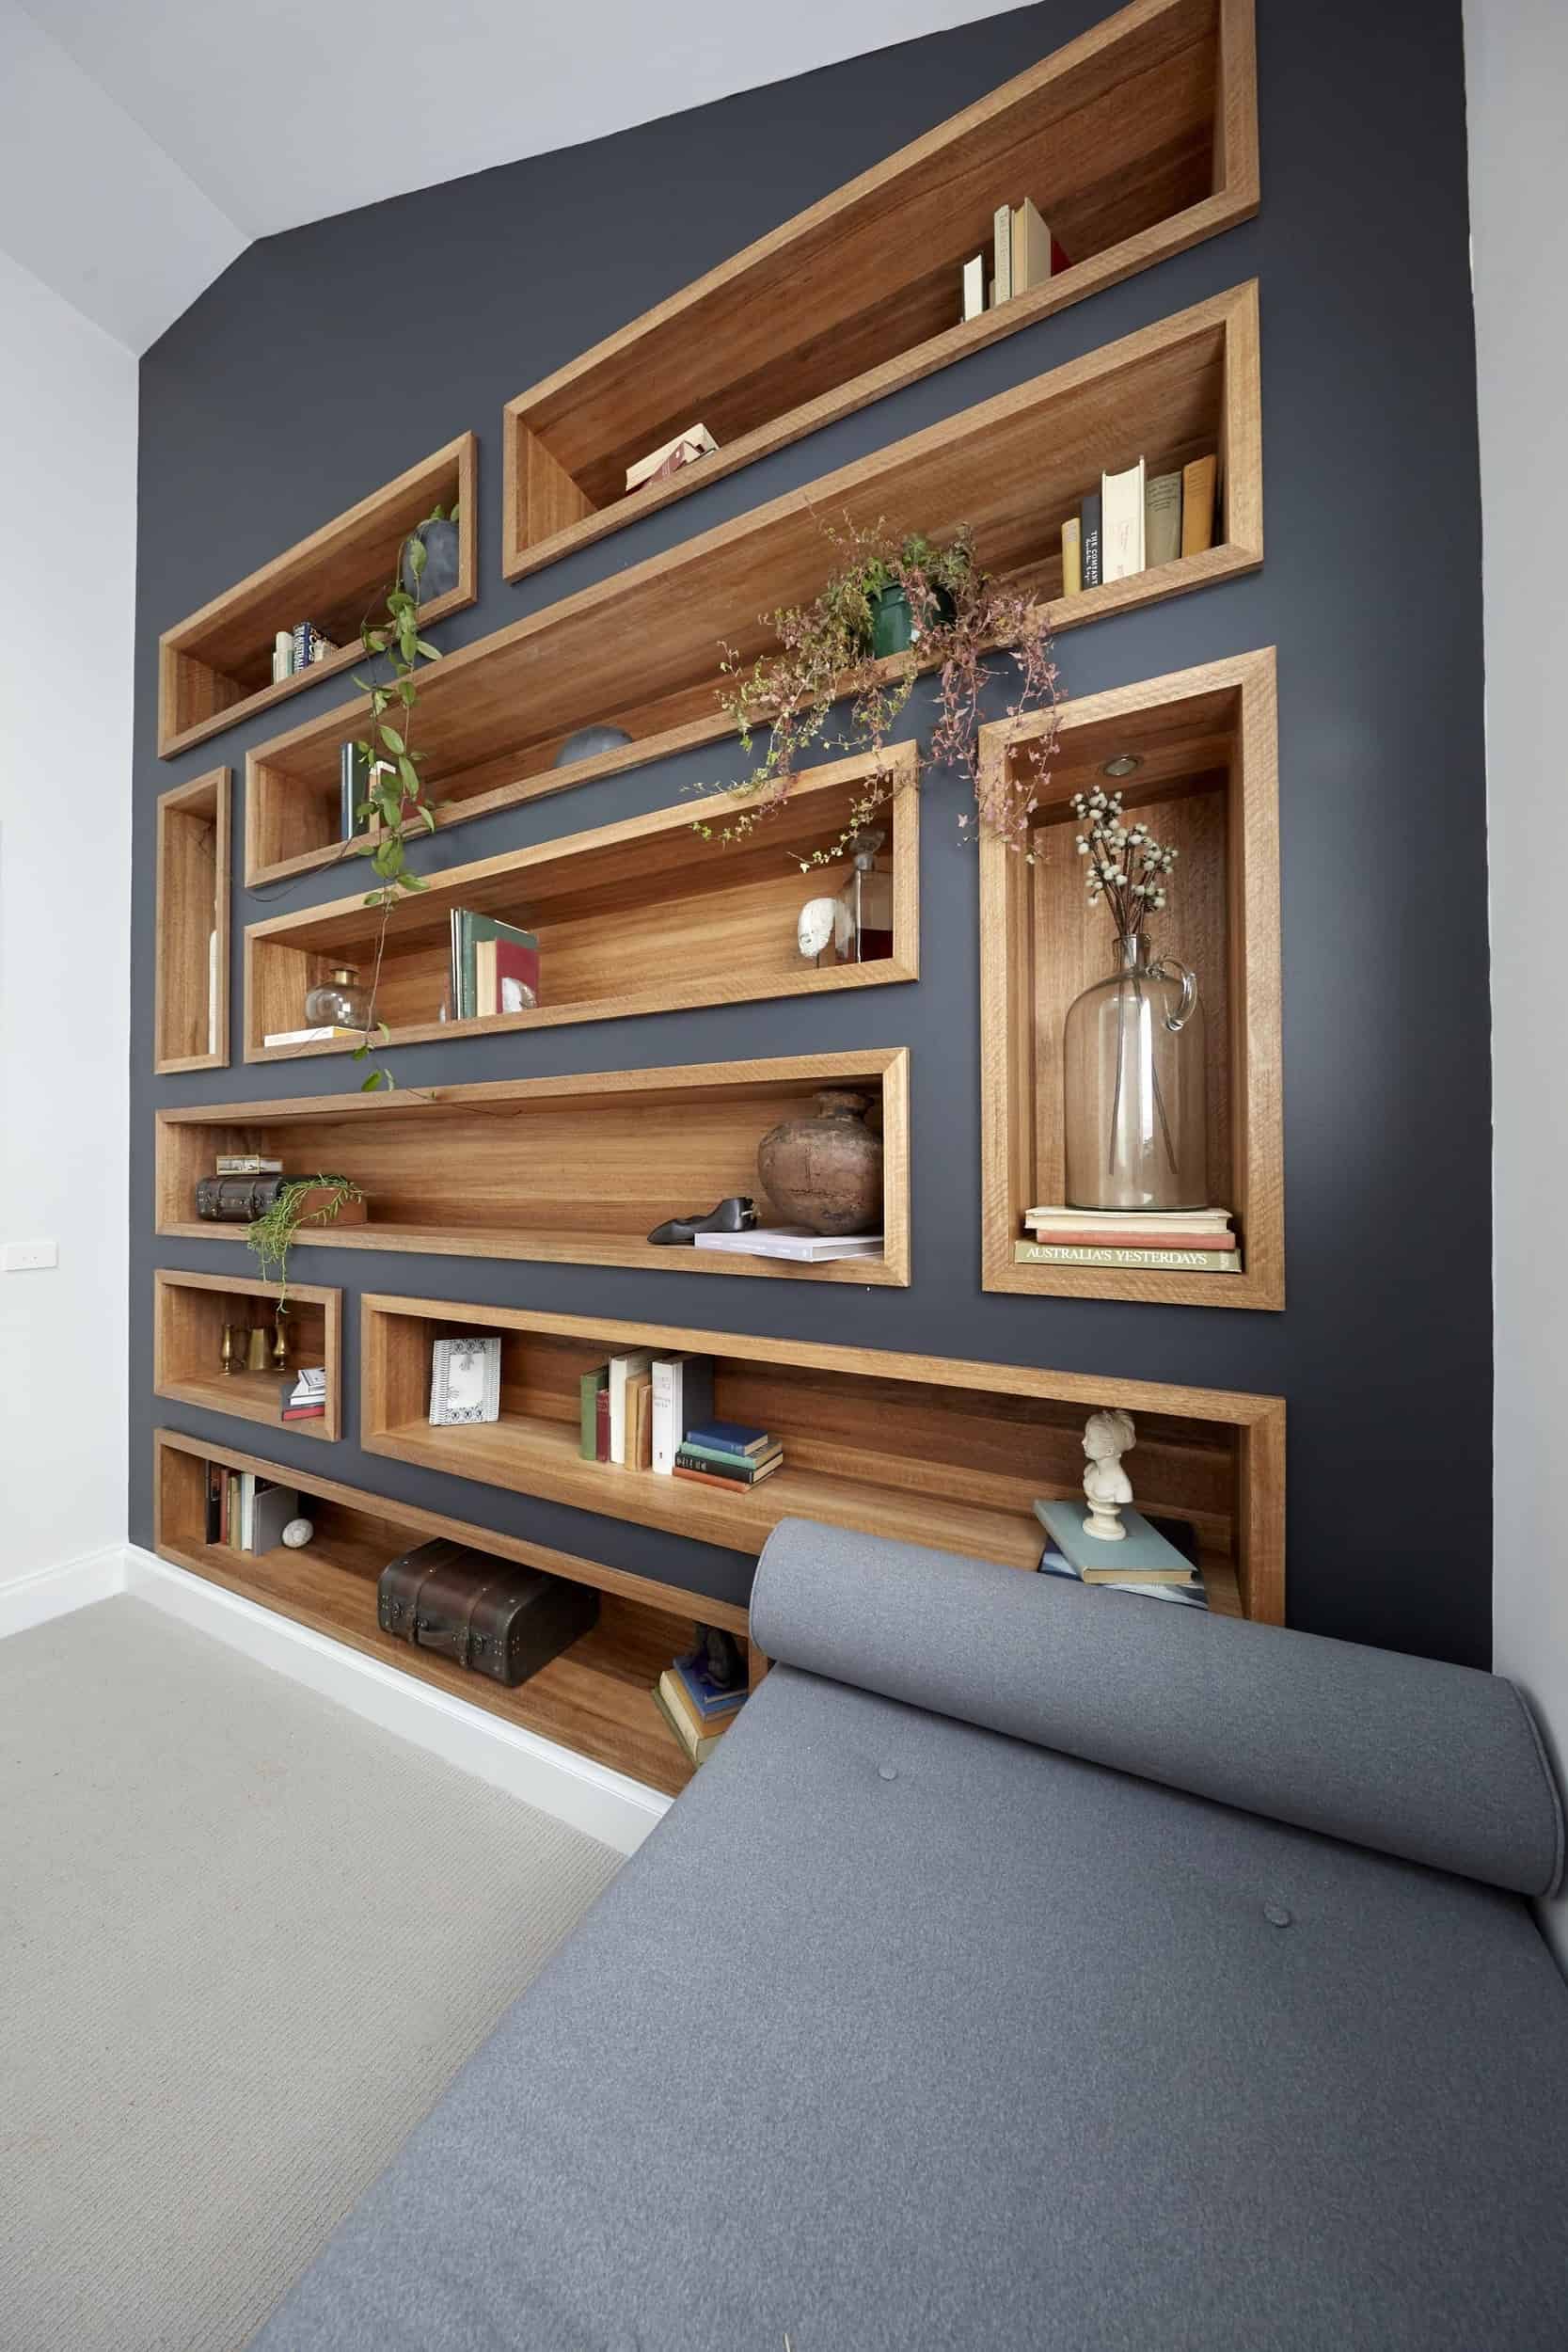 15 Cool Built in Shelves Ideas - Remodel Or Move